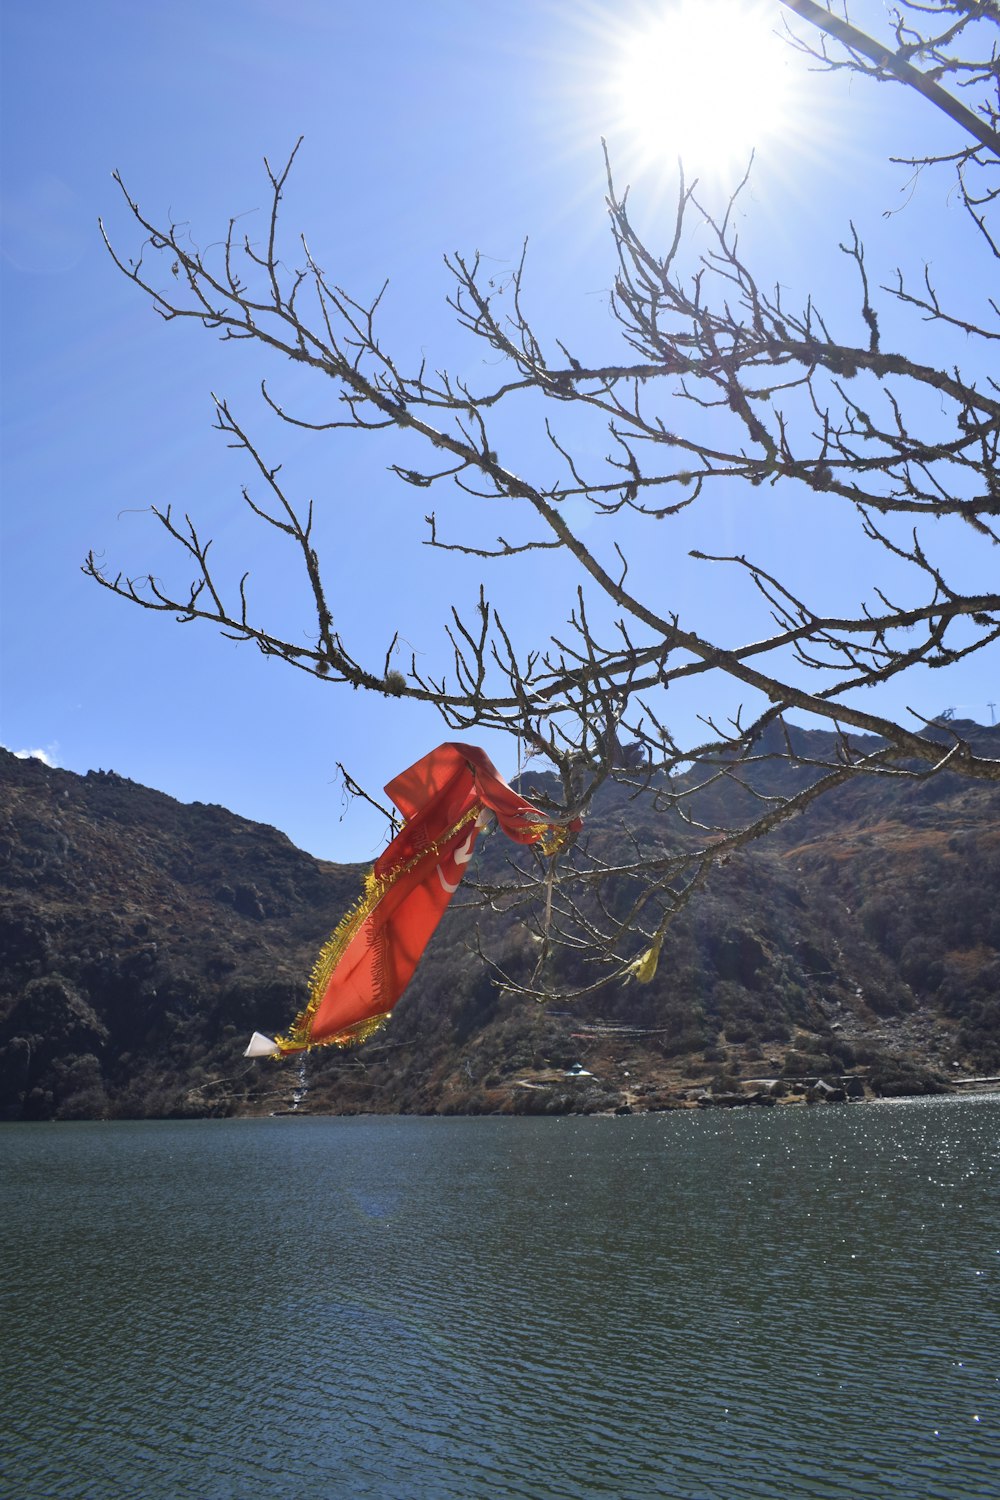 a kite is flying over a lake